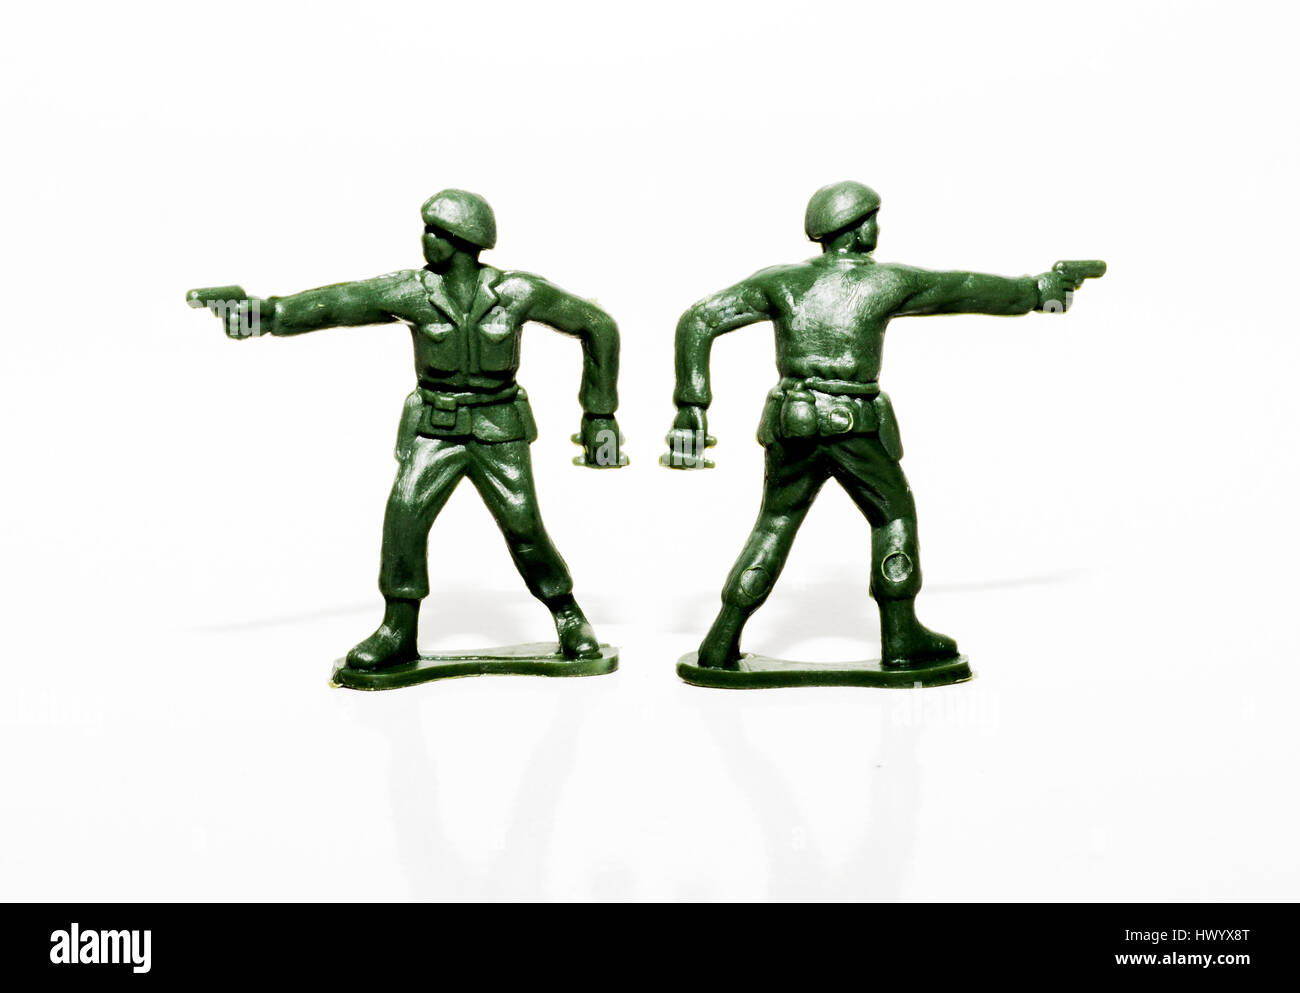 Two plastic green soldiers standing beside each other Stock Photo